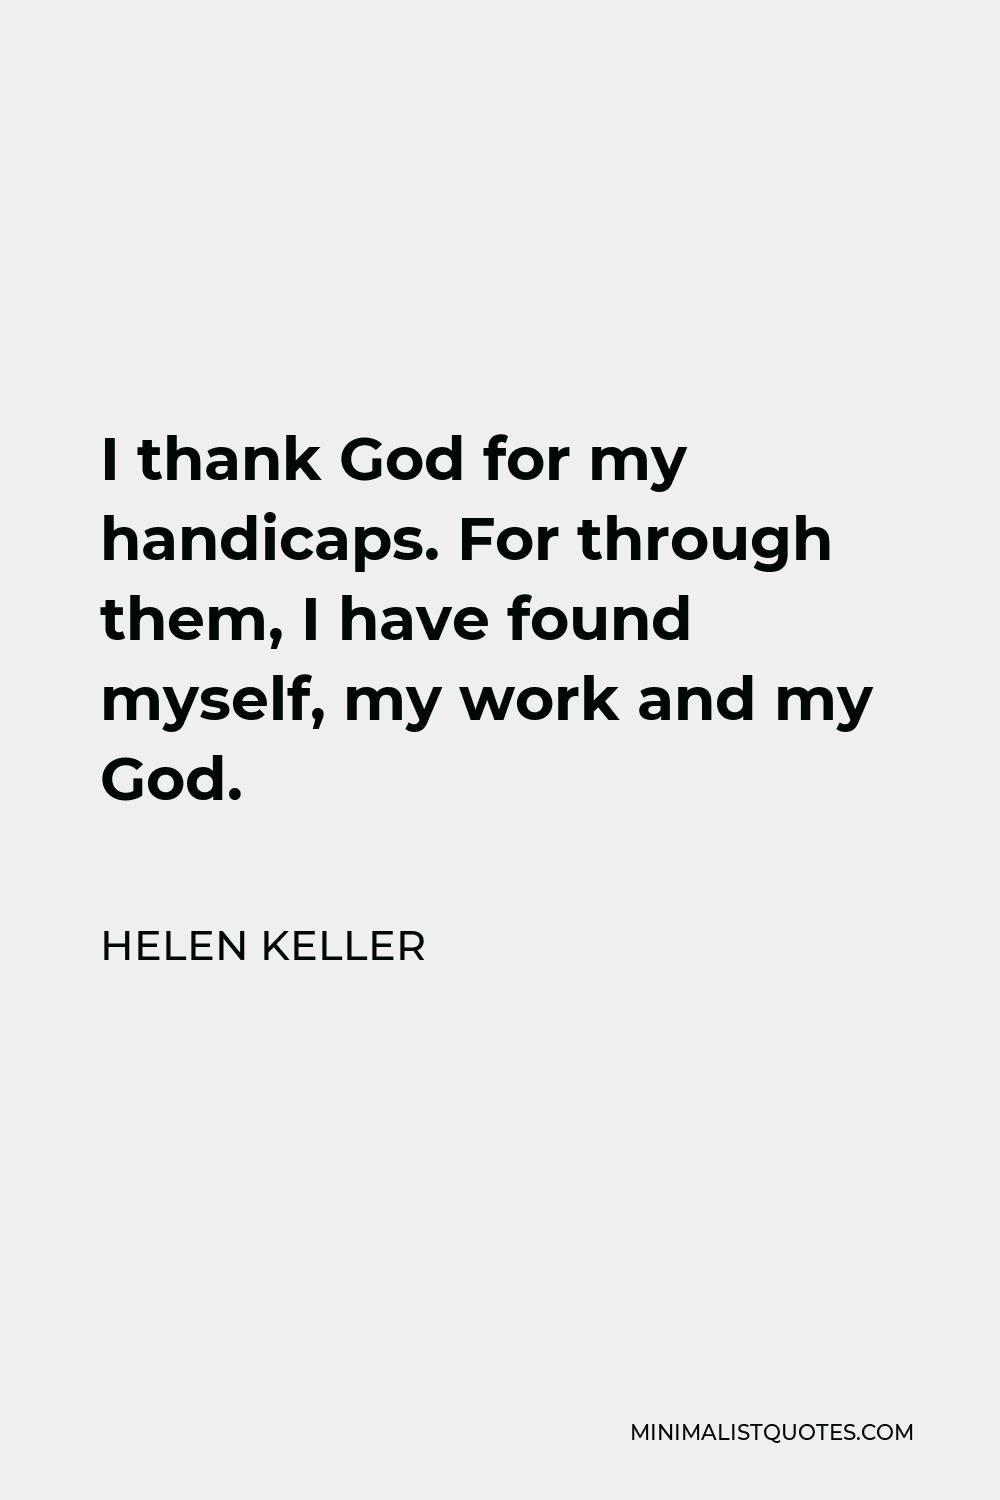 Helen Keller Quote - I thank God for my handicaps. For through them, I have found myself, my work and my God.